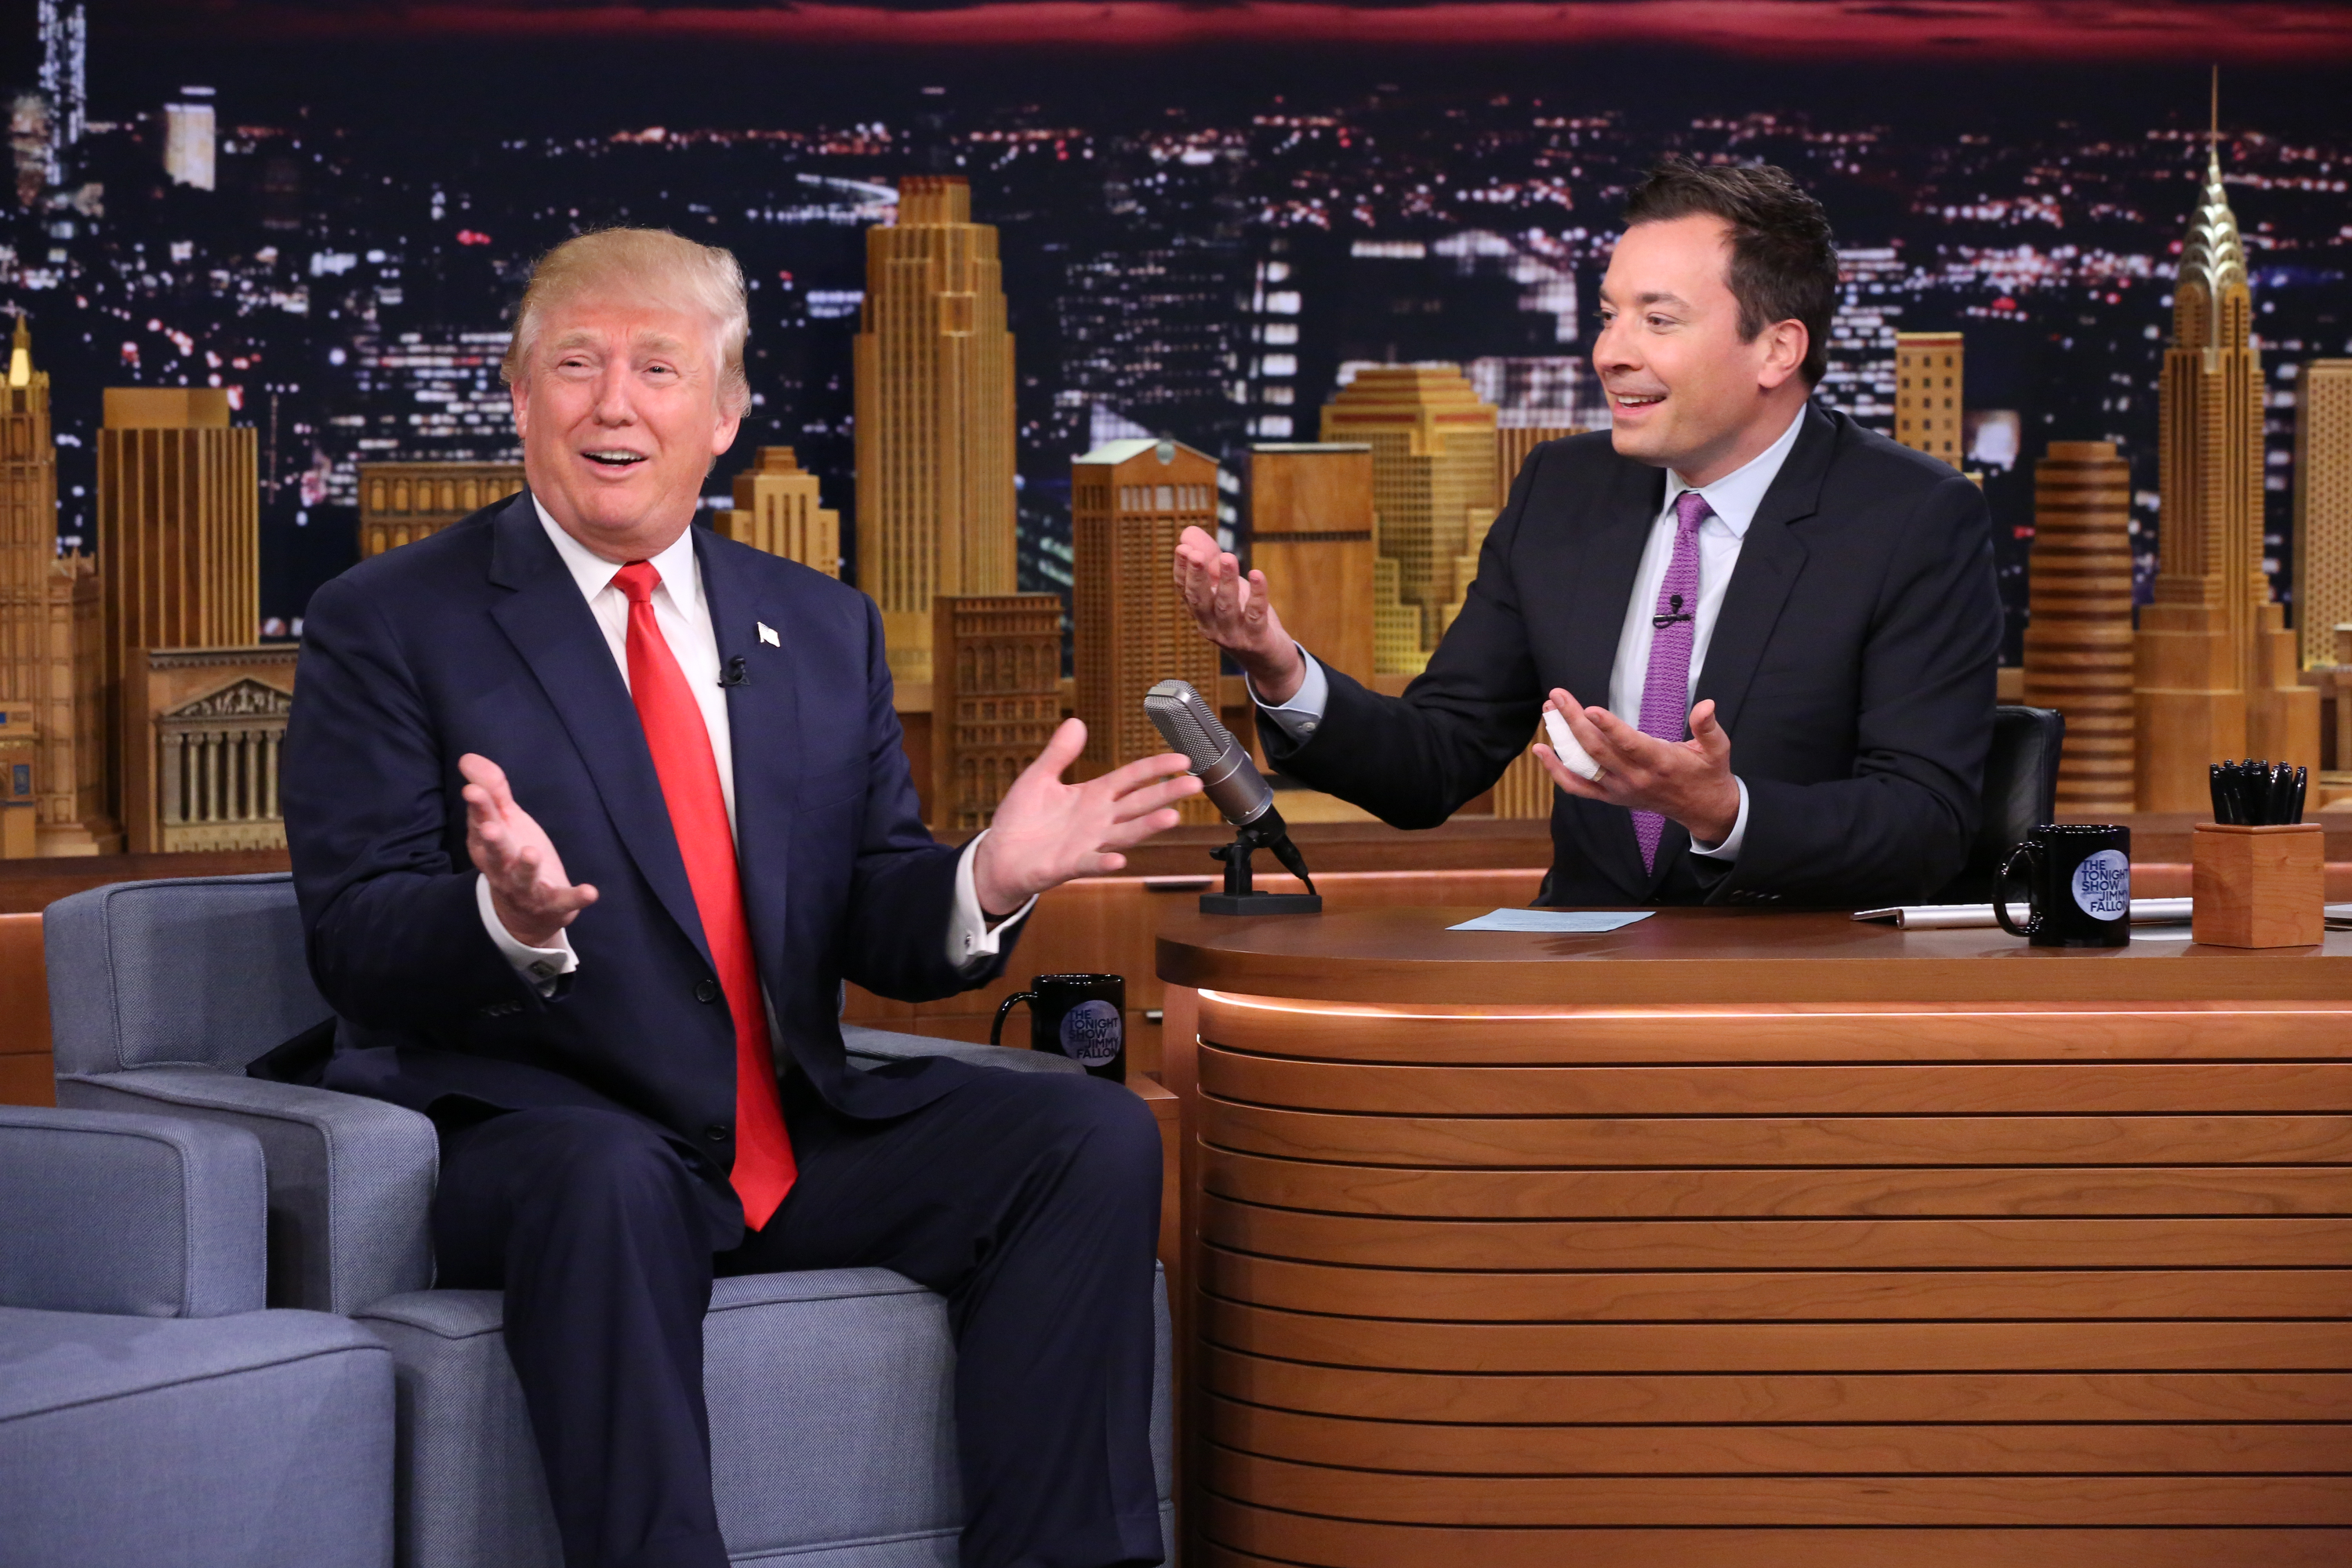 THE TONIGHT SHOW STARRING JIMMY FALLON -- Episode 0327 -- Pictured: (l-r) Donald Trump during an interview with host Jimmy Fallon on September 11, 2015 (NBC&mdash;NBCU Photo Bank via Getty Images)